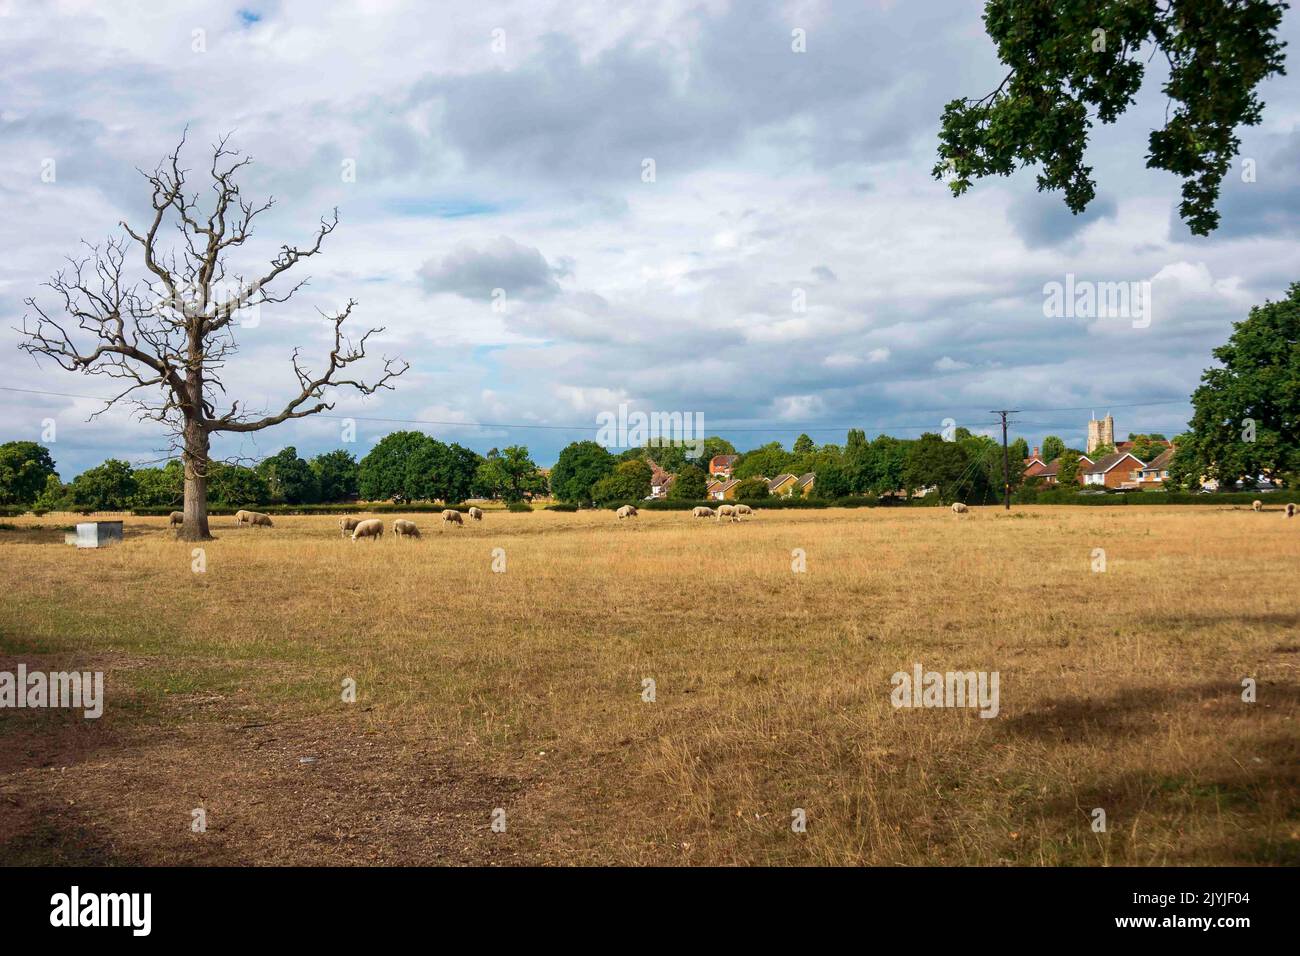 View across meadows with sheep towards Staplehurst in Kent, during the drought with grass turned brown Stock Photo